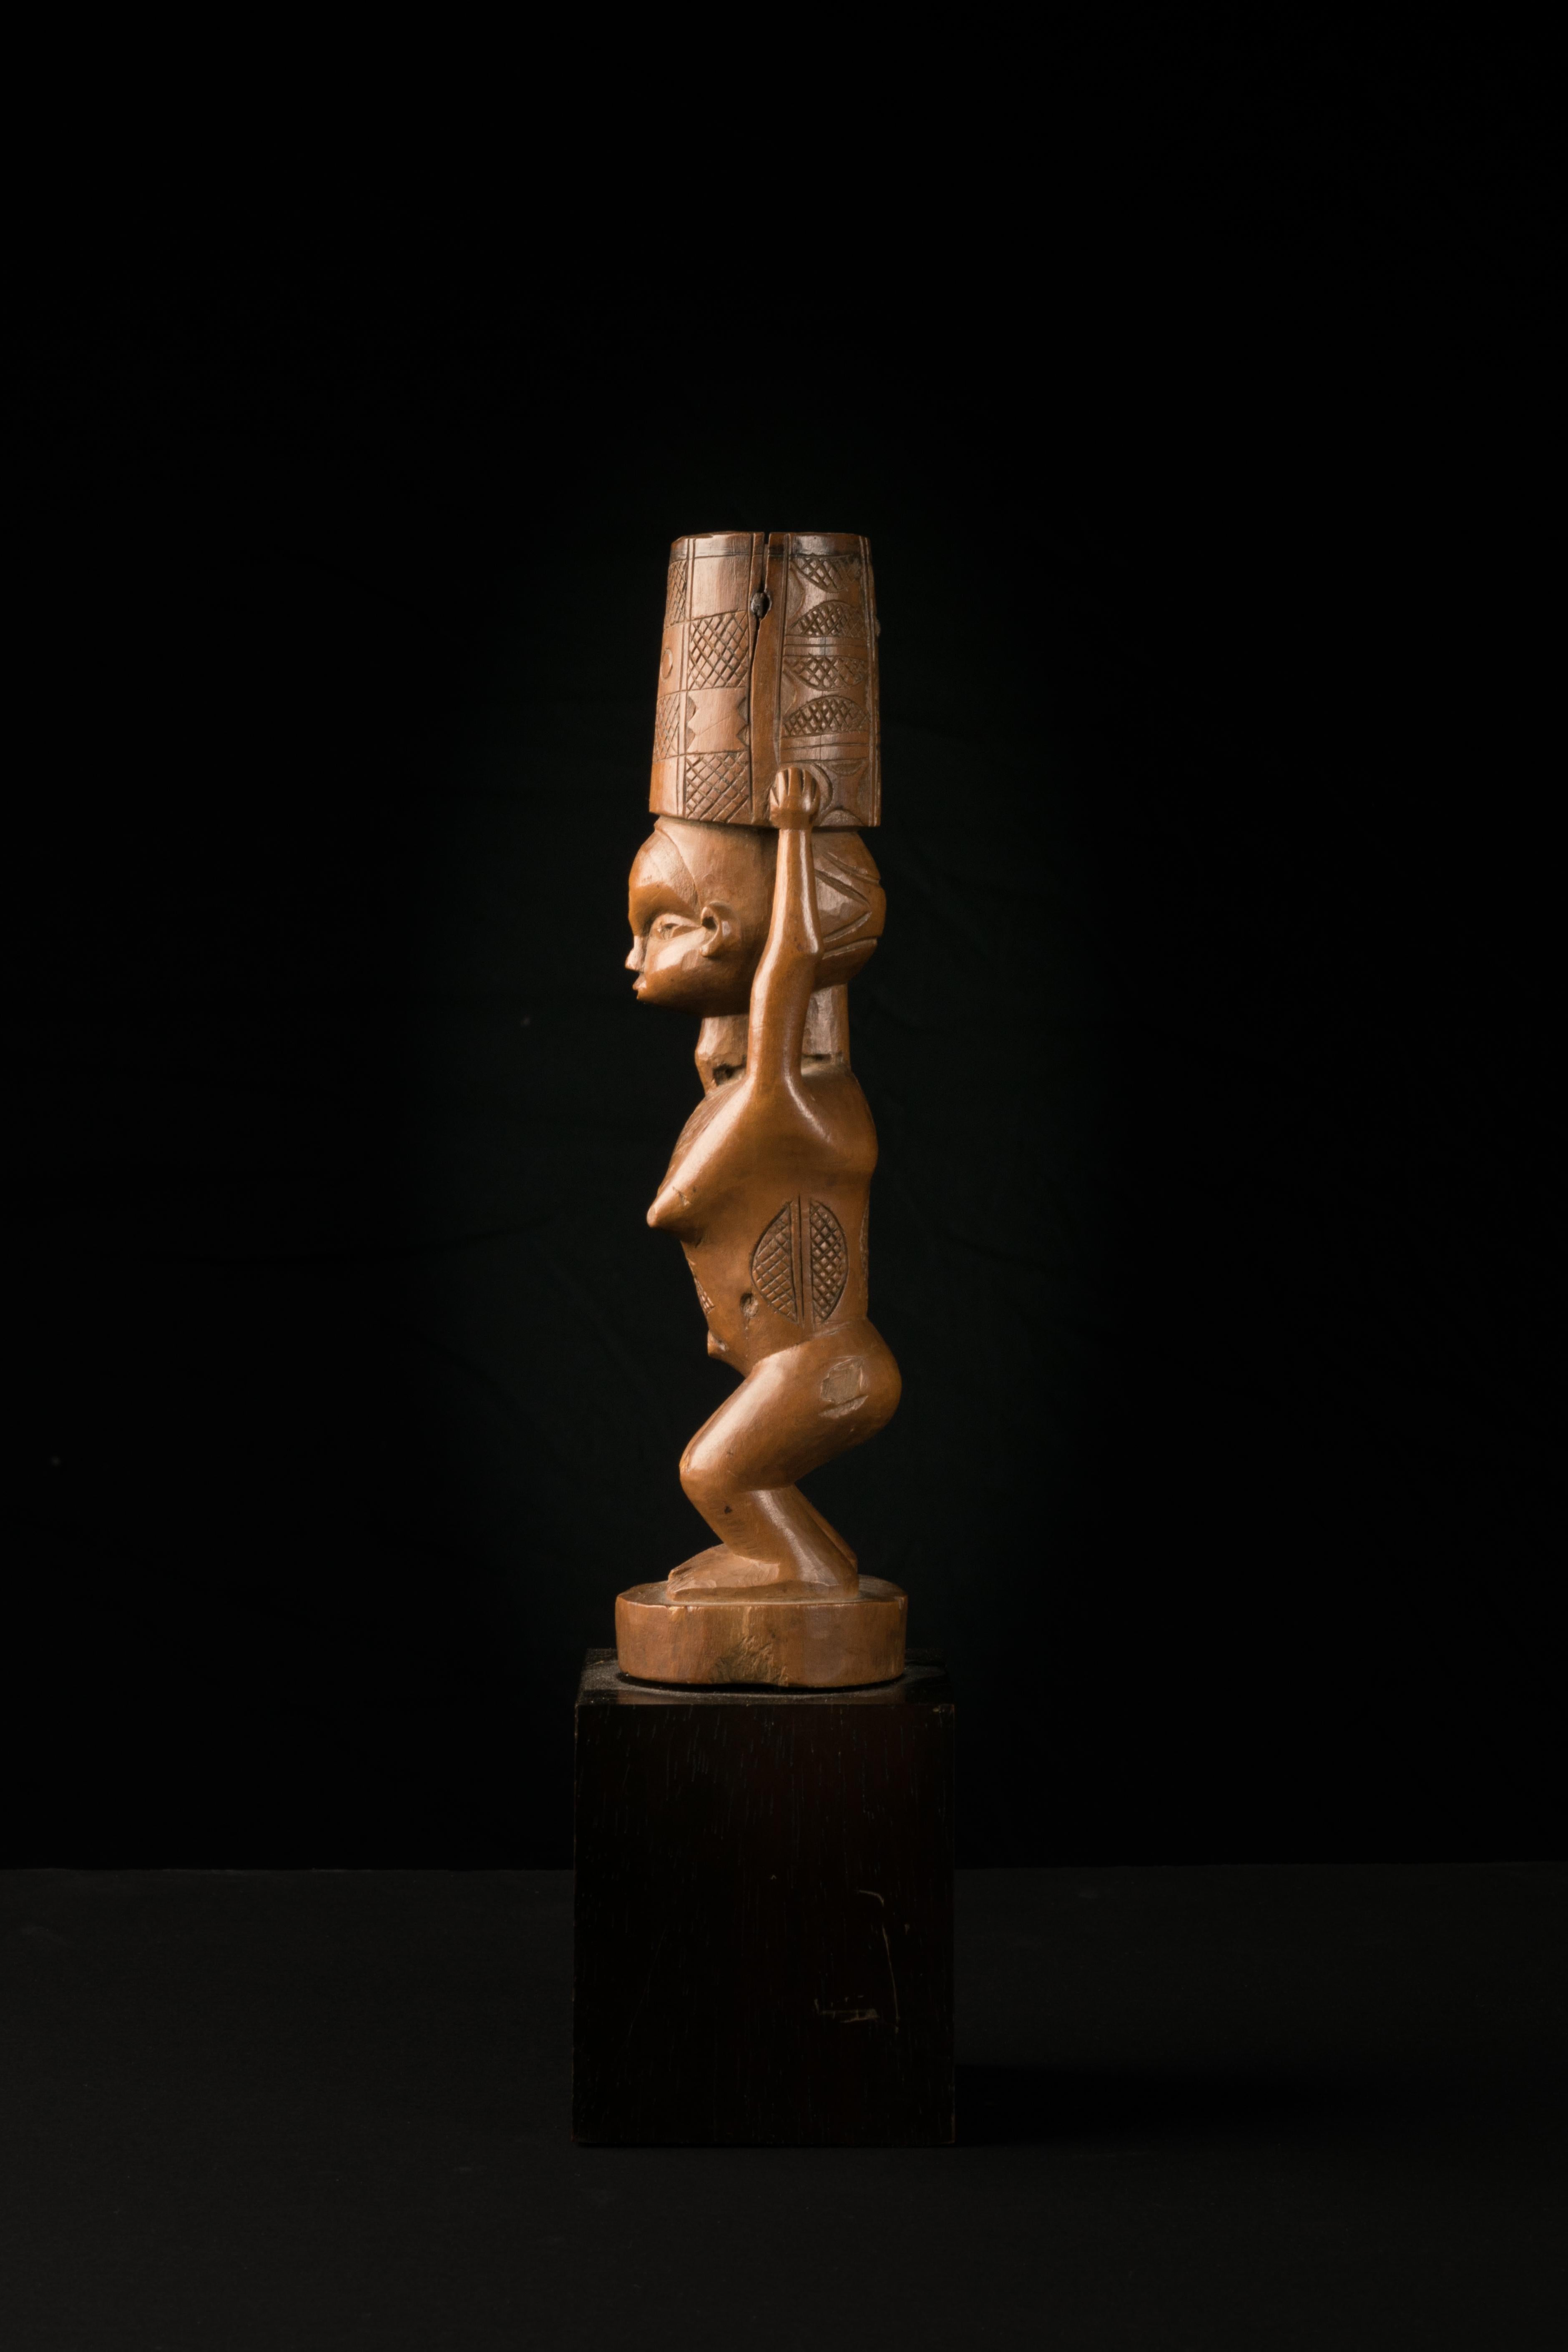 Flywhisk handle sculptured in the form of a woman with slightly bended Knees and Scarification’s on different parts of her body. She is holding a vessel that kept a ponytail. This Flywhisk was part of a Chief's Regalia.
Provenance: ancient